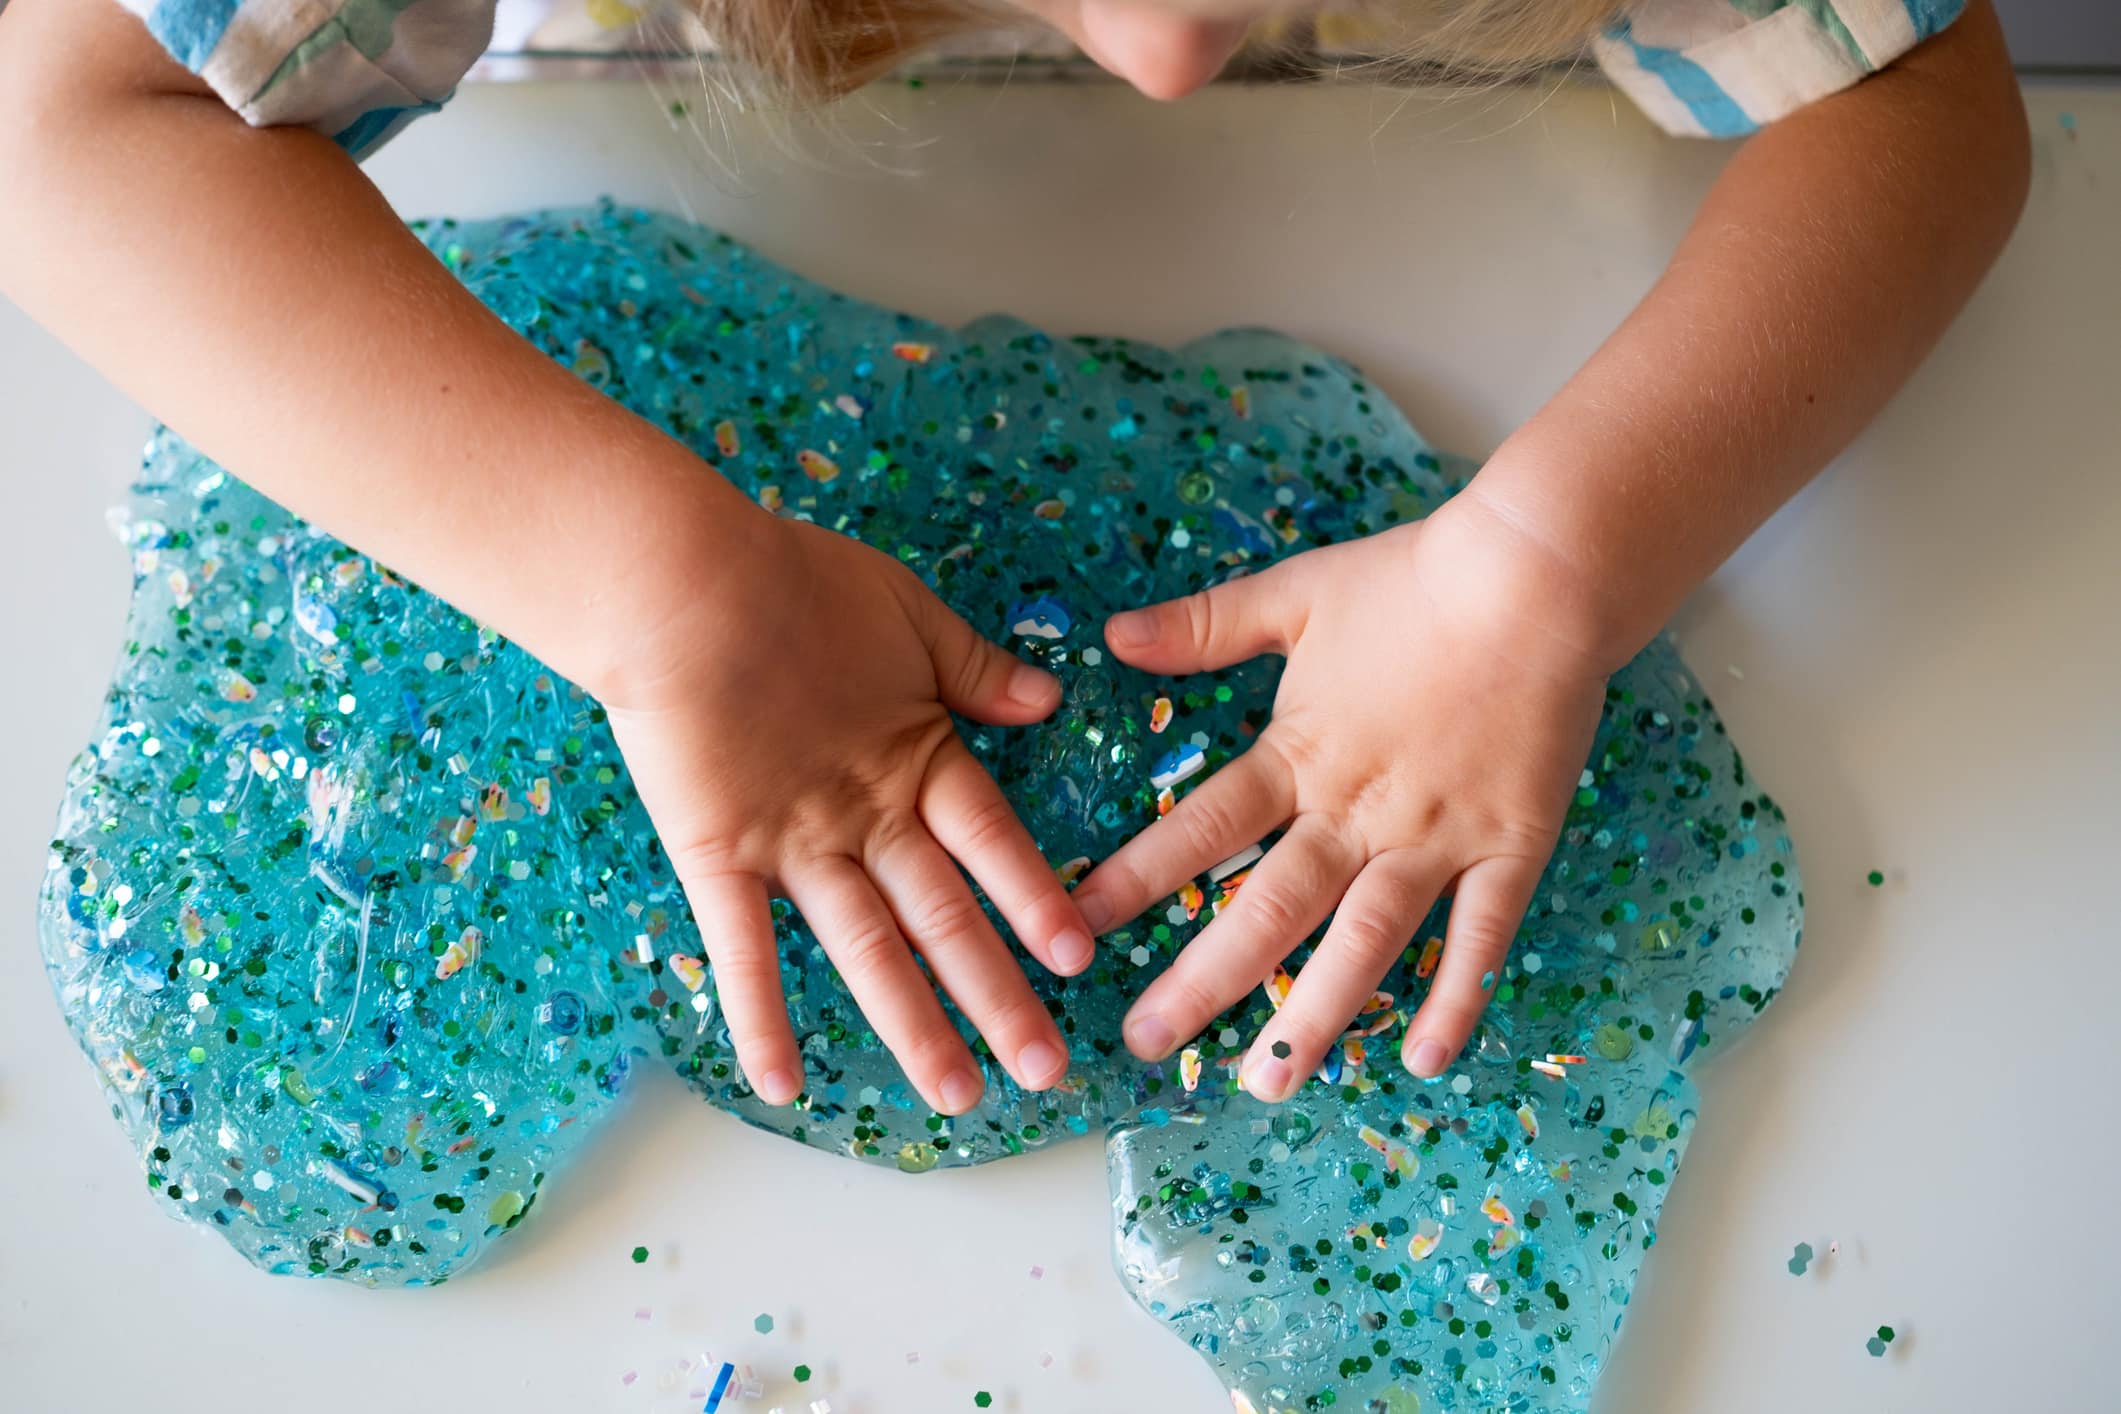 A child's hands in slime